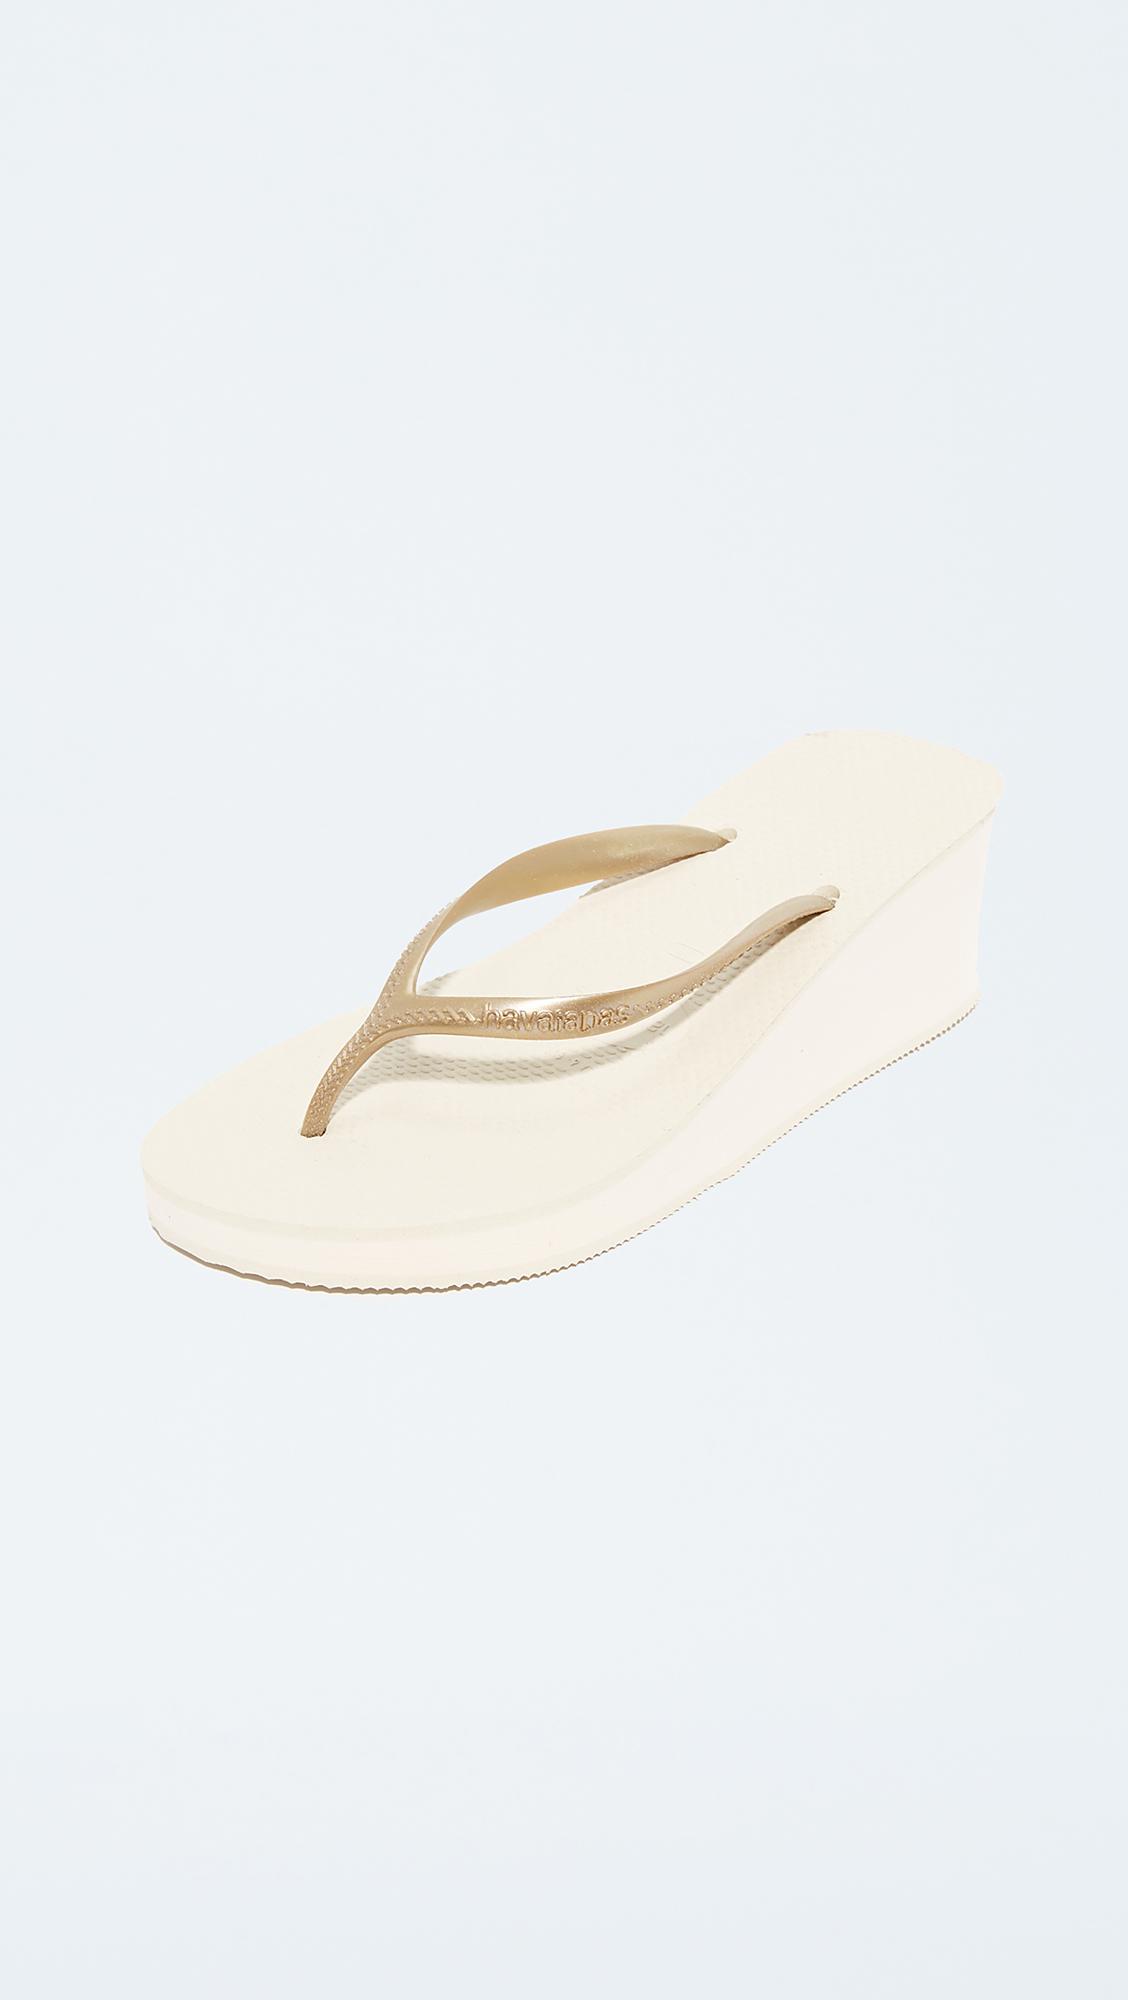 Havaianas High Fashion Wedge Sandals in Natural | Lyst